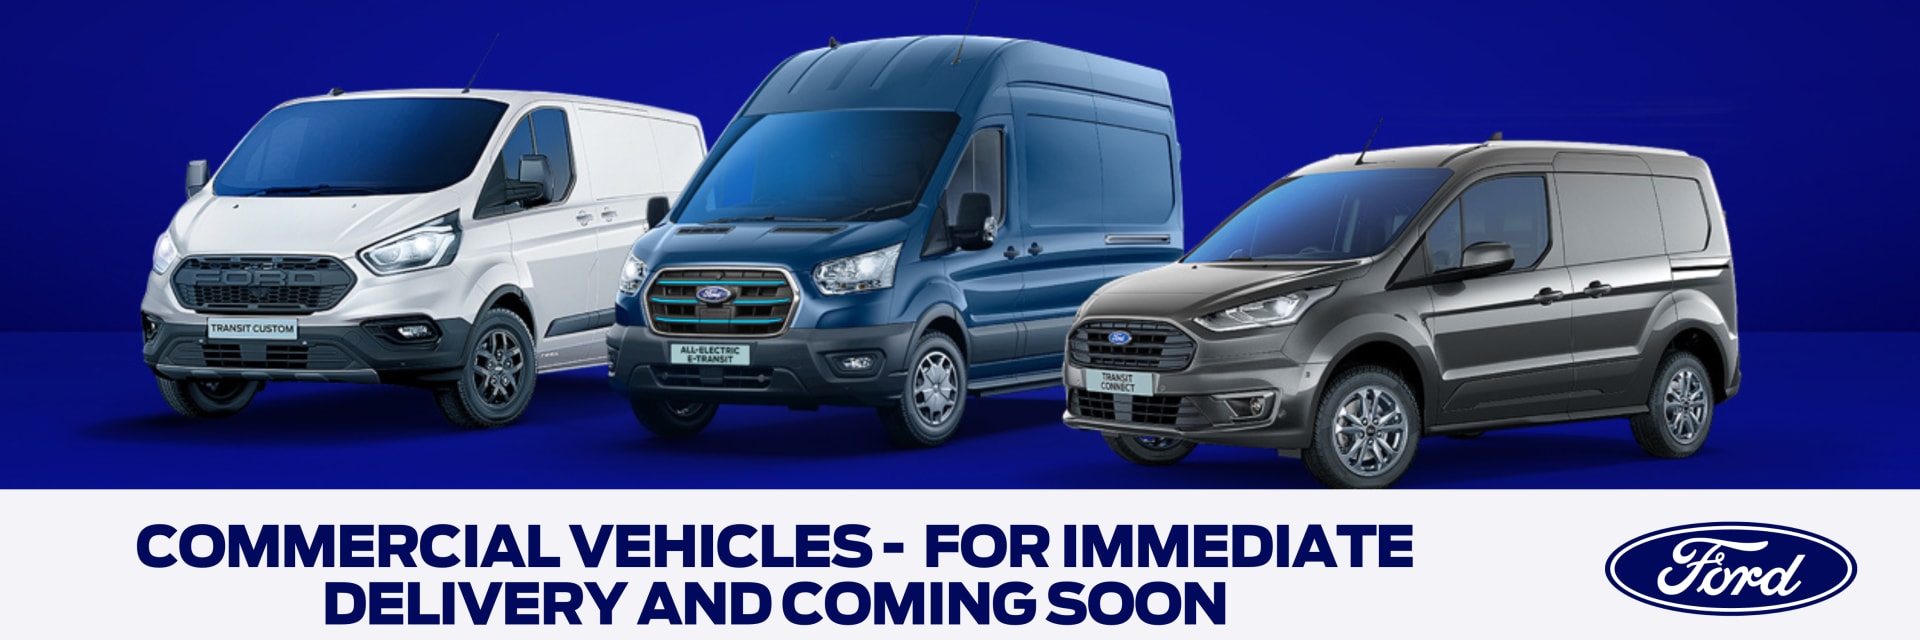 Commercial Vehicles for Immediate Delivery & In Stock Soon